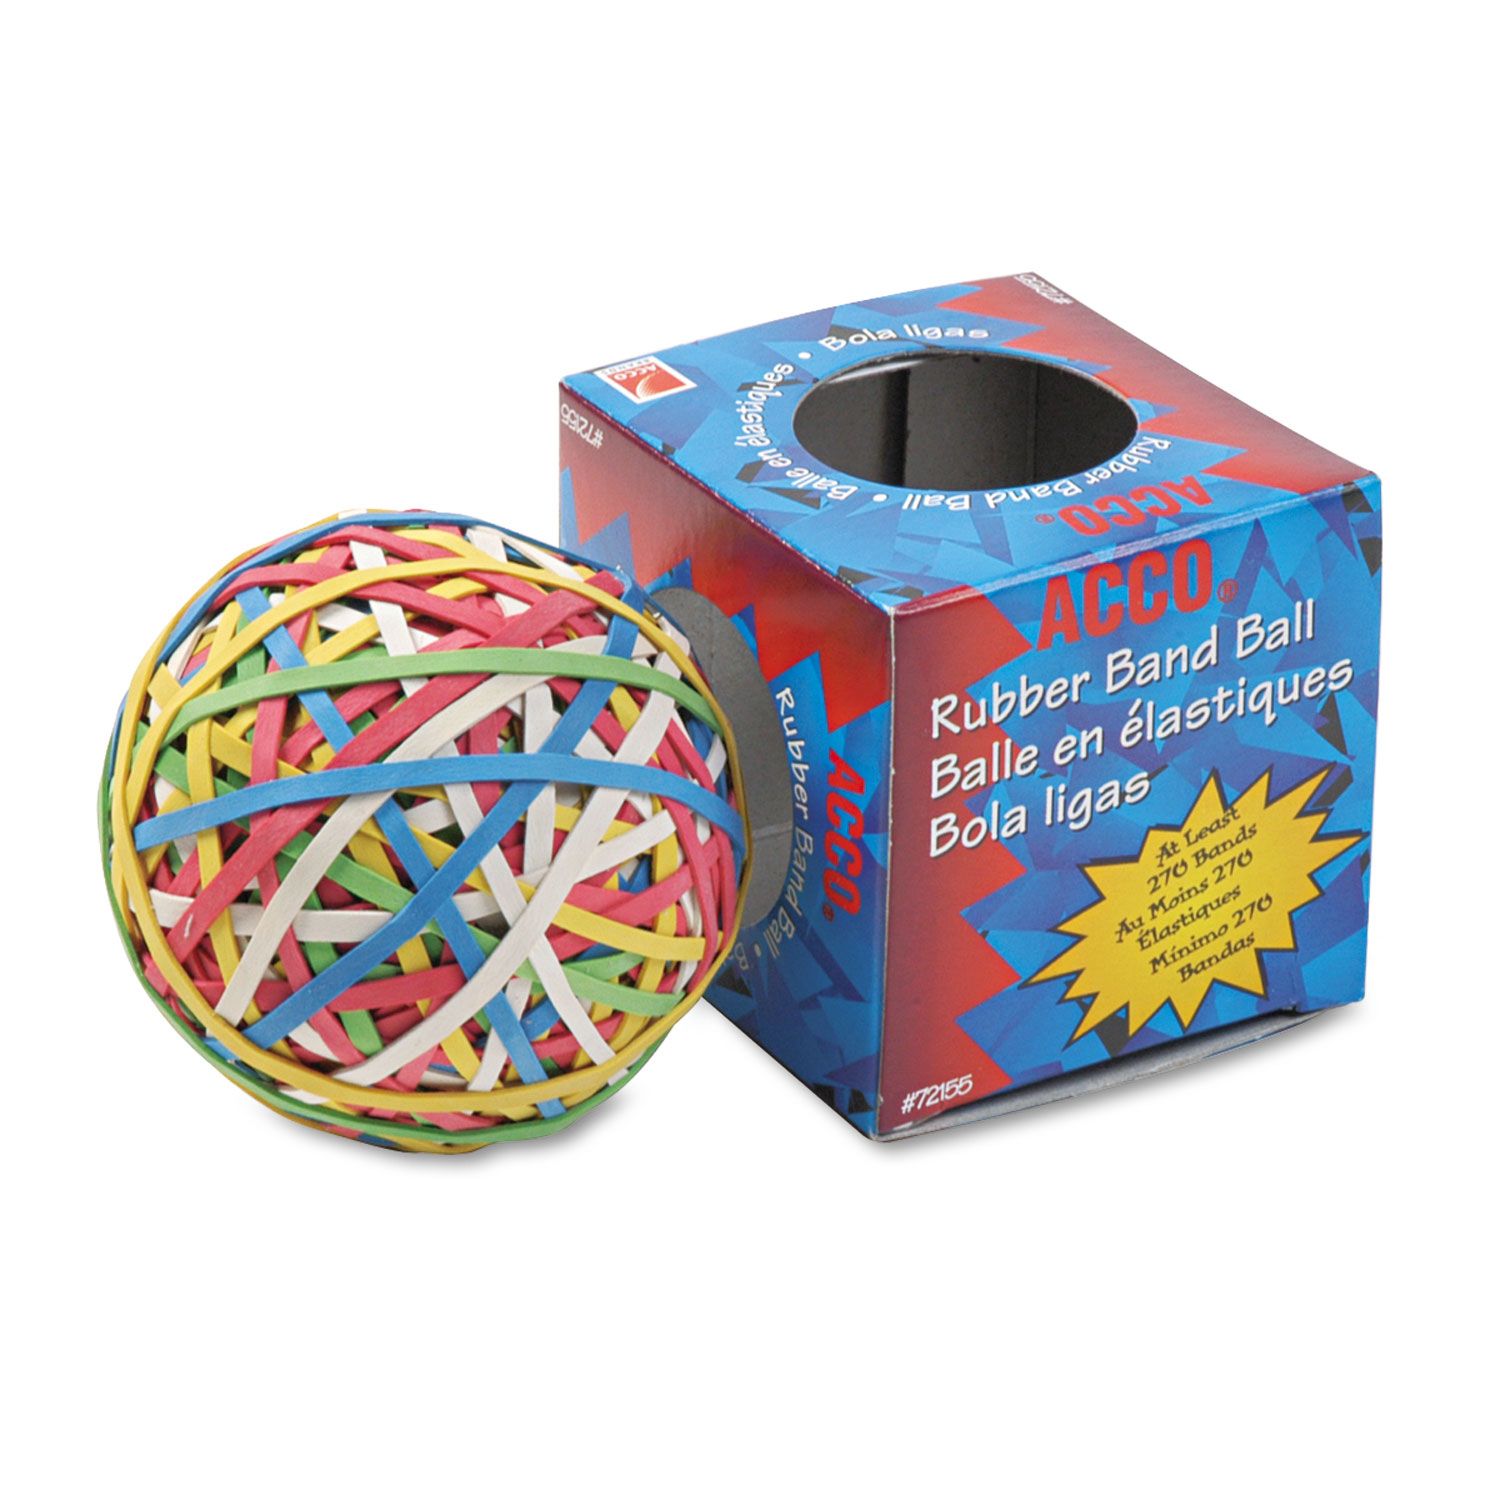  ACCO A7072155 Rubber Band Ball, 3.25 Diameter, Size 34, Assorted Gauges, Assorted Colors, 270/Pack (ACC72155) 